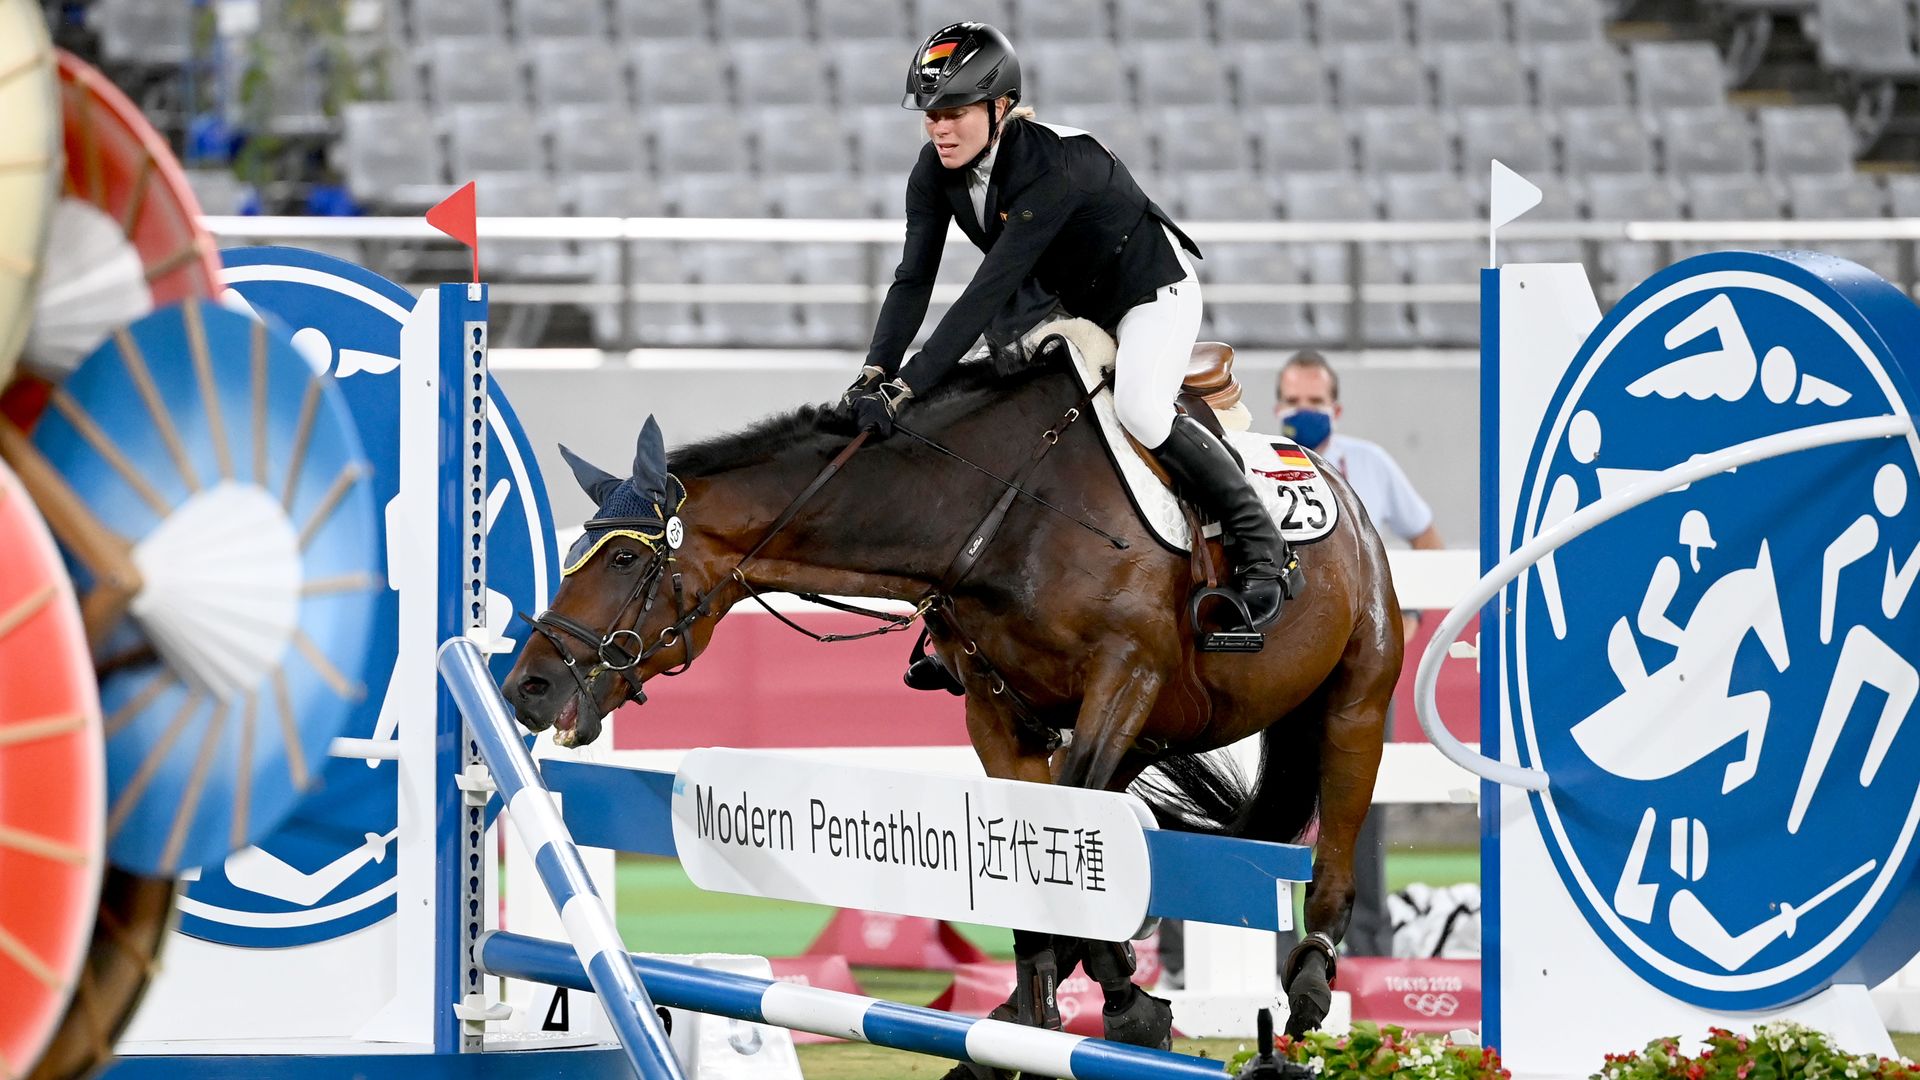 The horse Saint Boy, ridden by Annika Schleu from Germany, refuses to jump. 